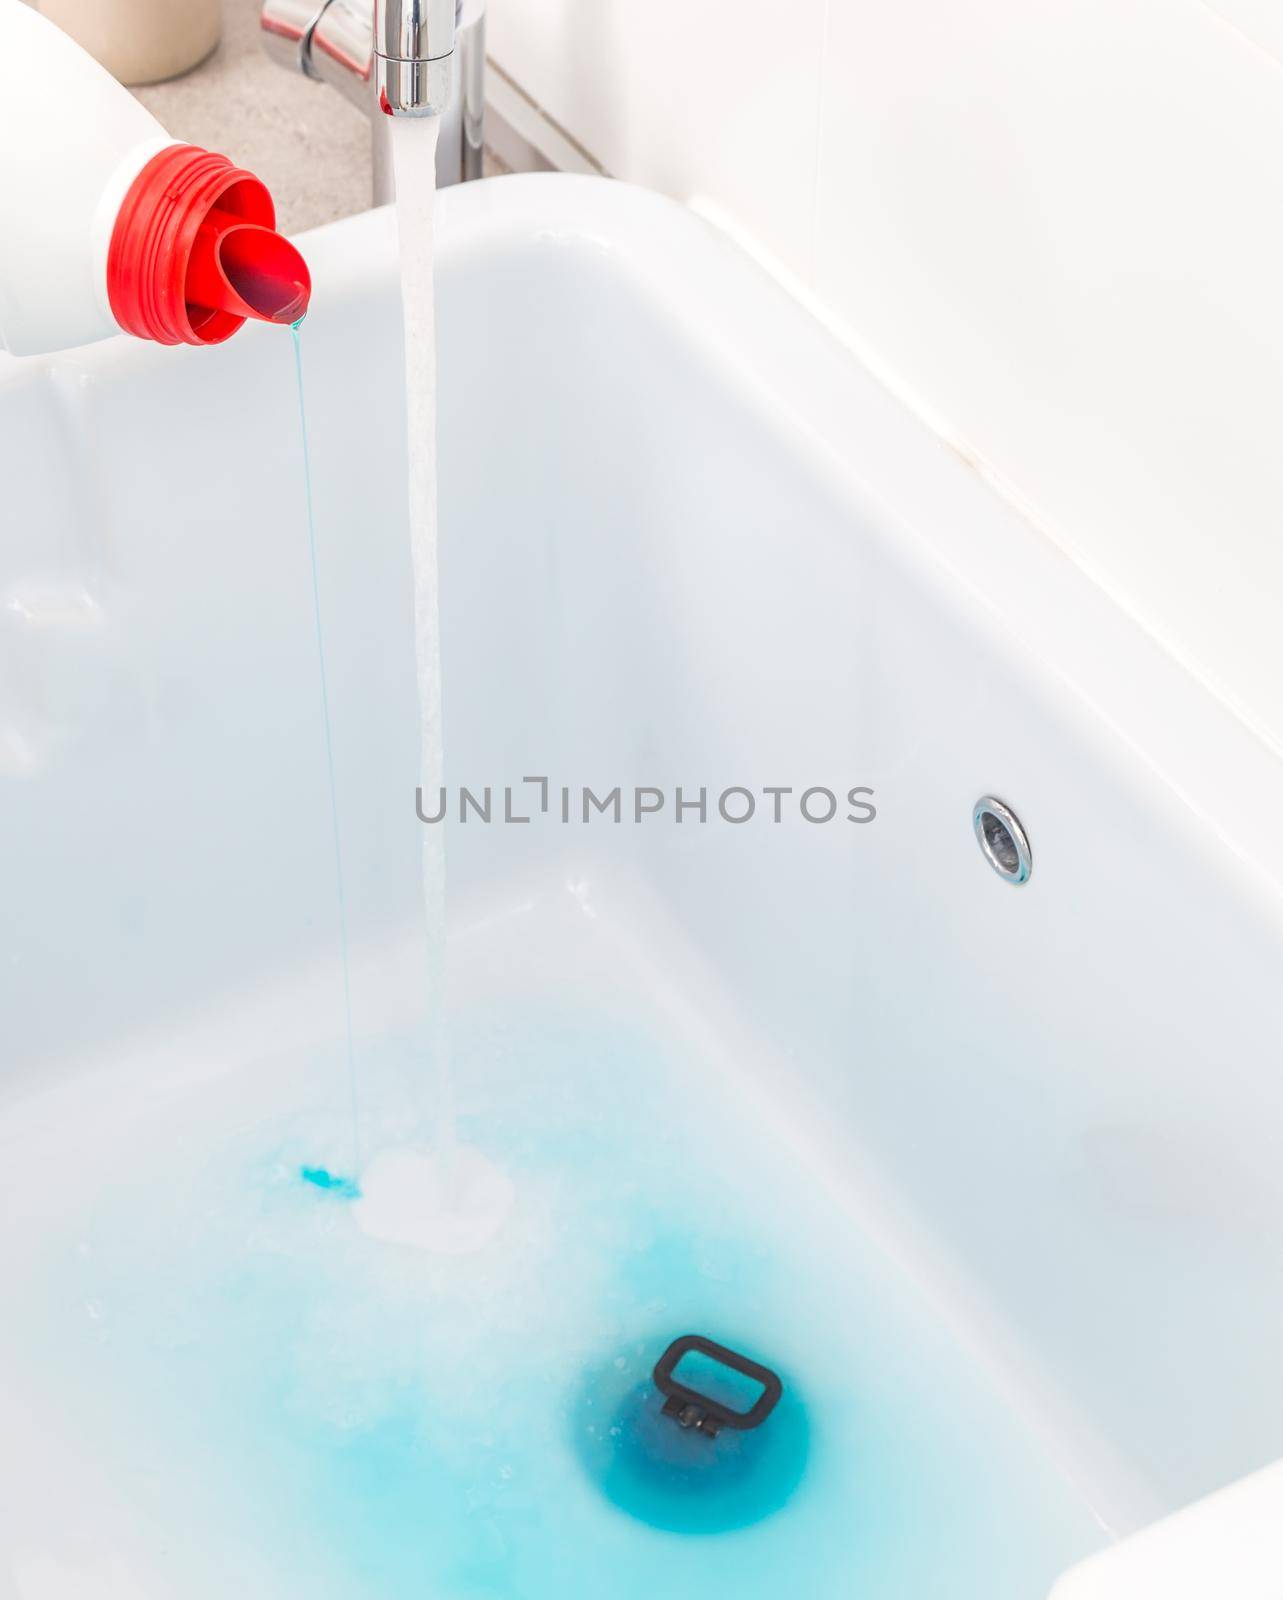 Pouring blue detergent into empty sink before washing clothes in laundry room by Mariakray